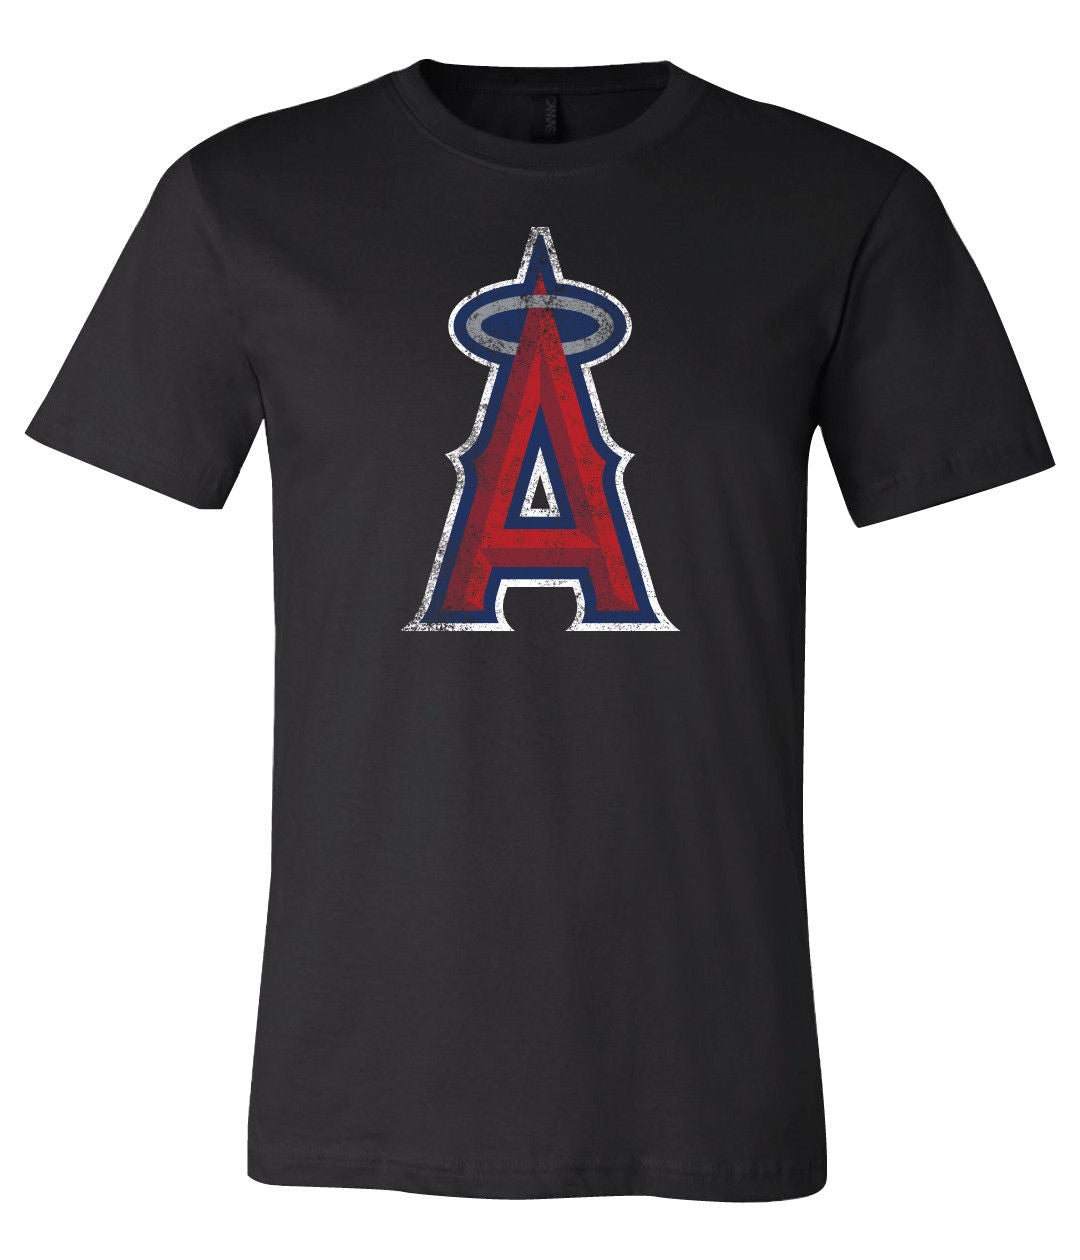 Los Angeles Angels of Anaheim A logo Distressed Vintage T-shirt 6